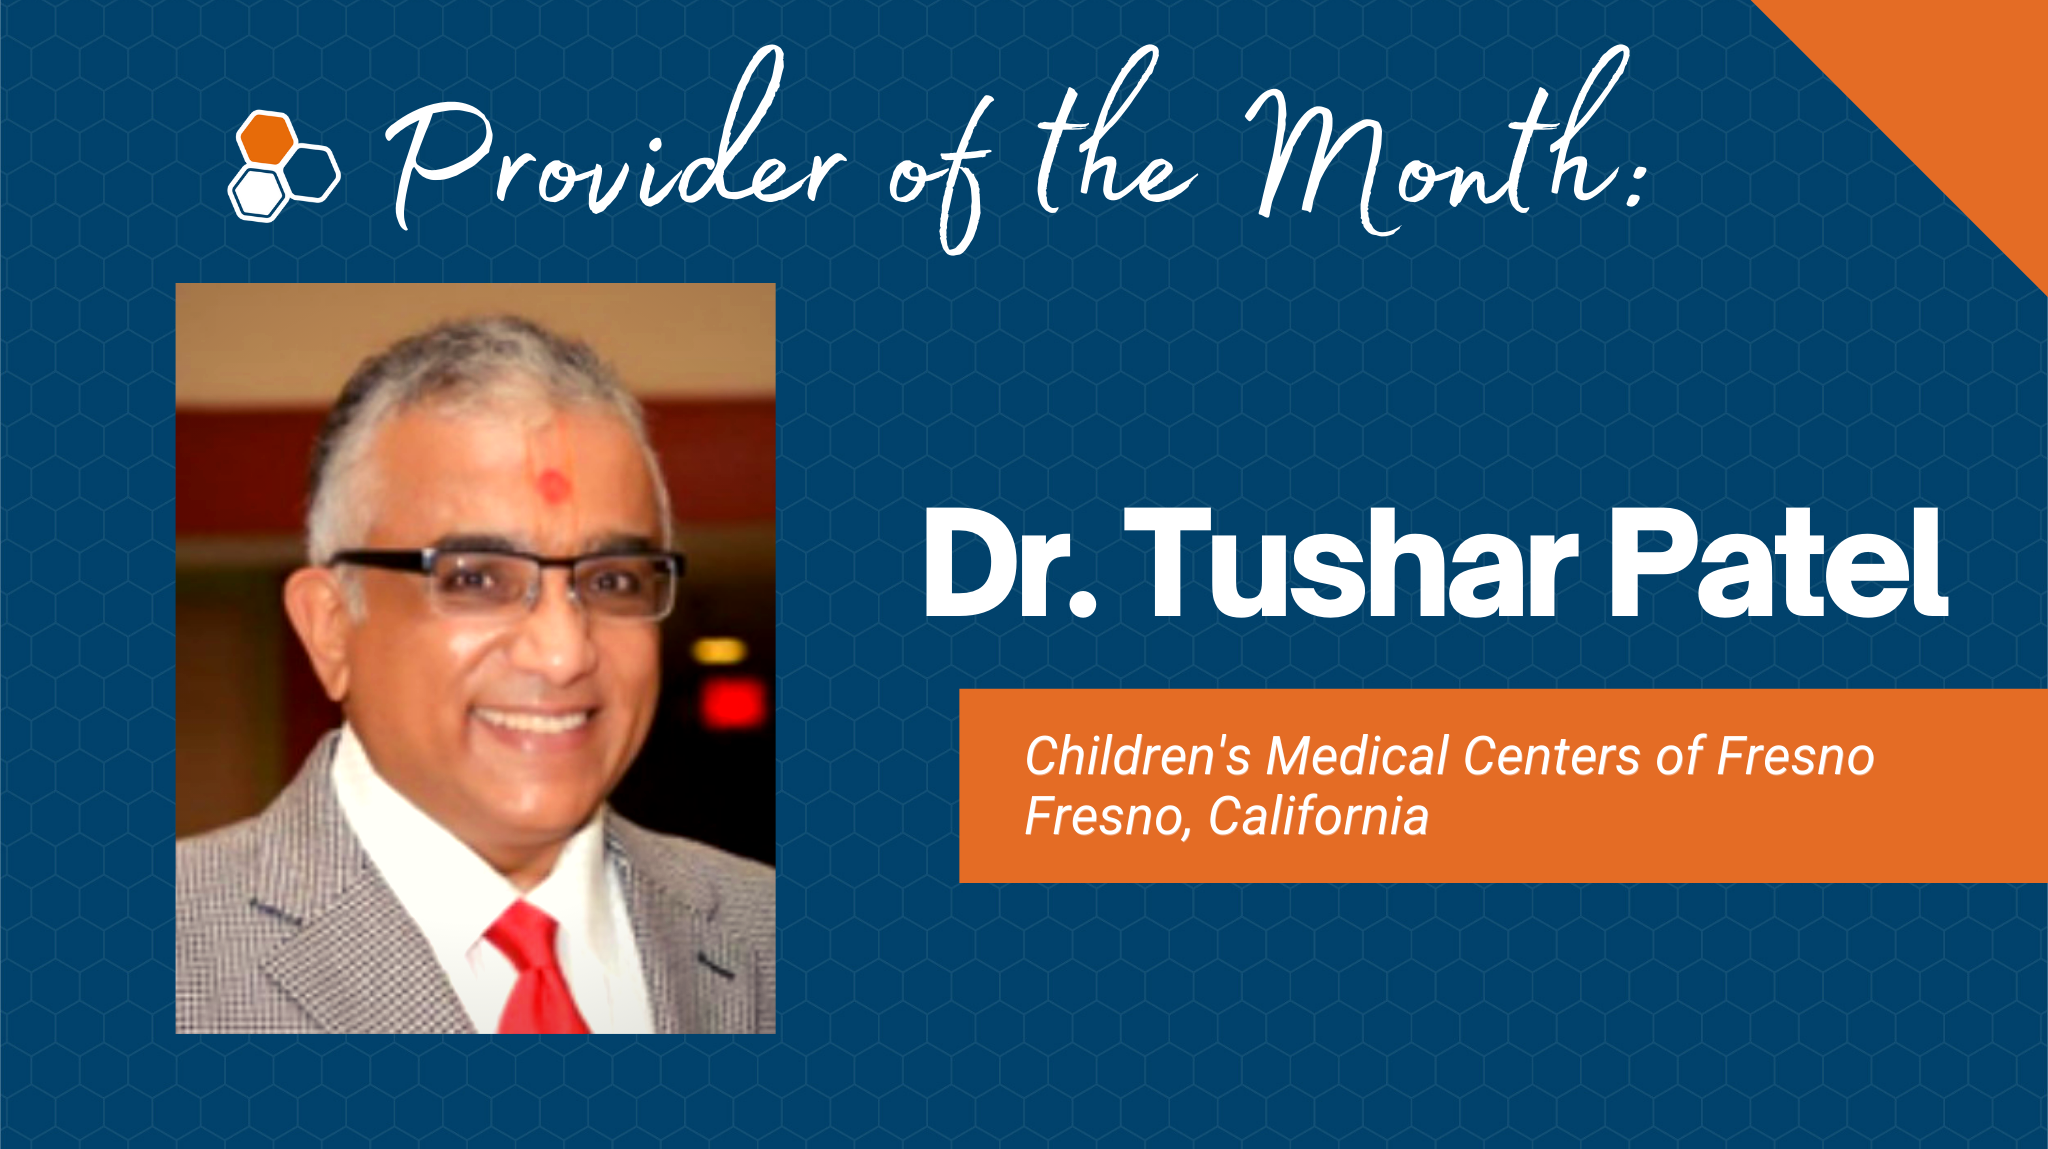 Dr. Tushar Patel Provider of the Month